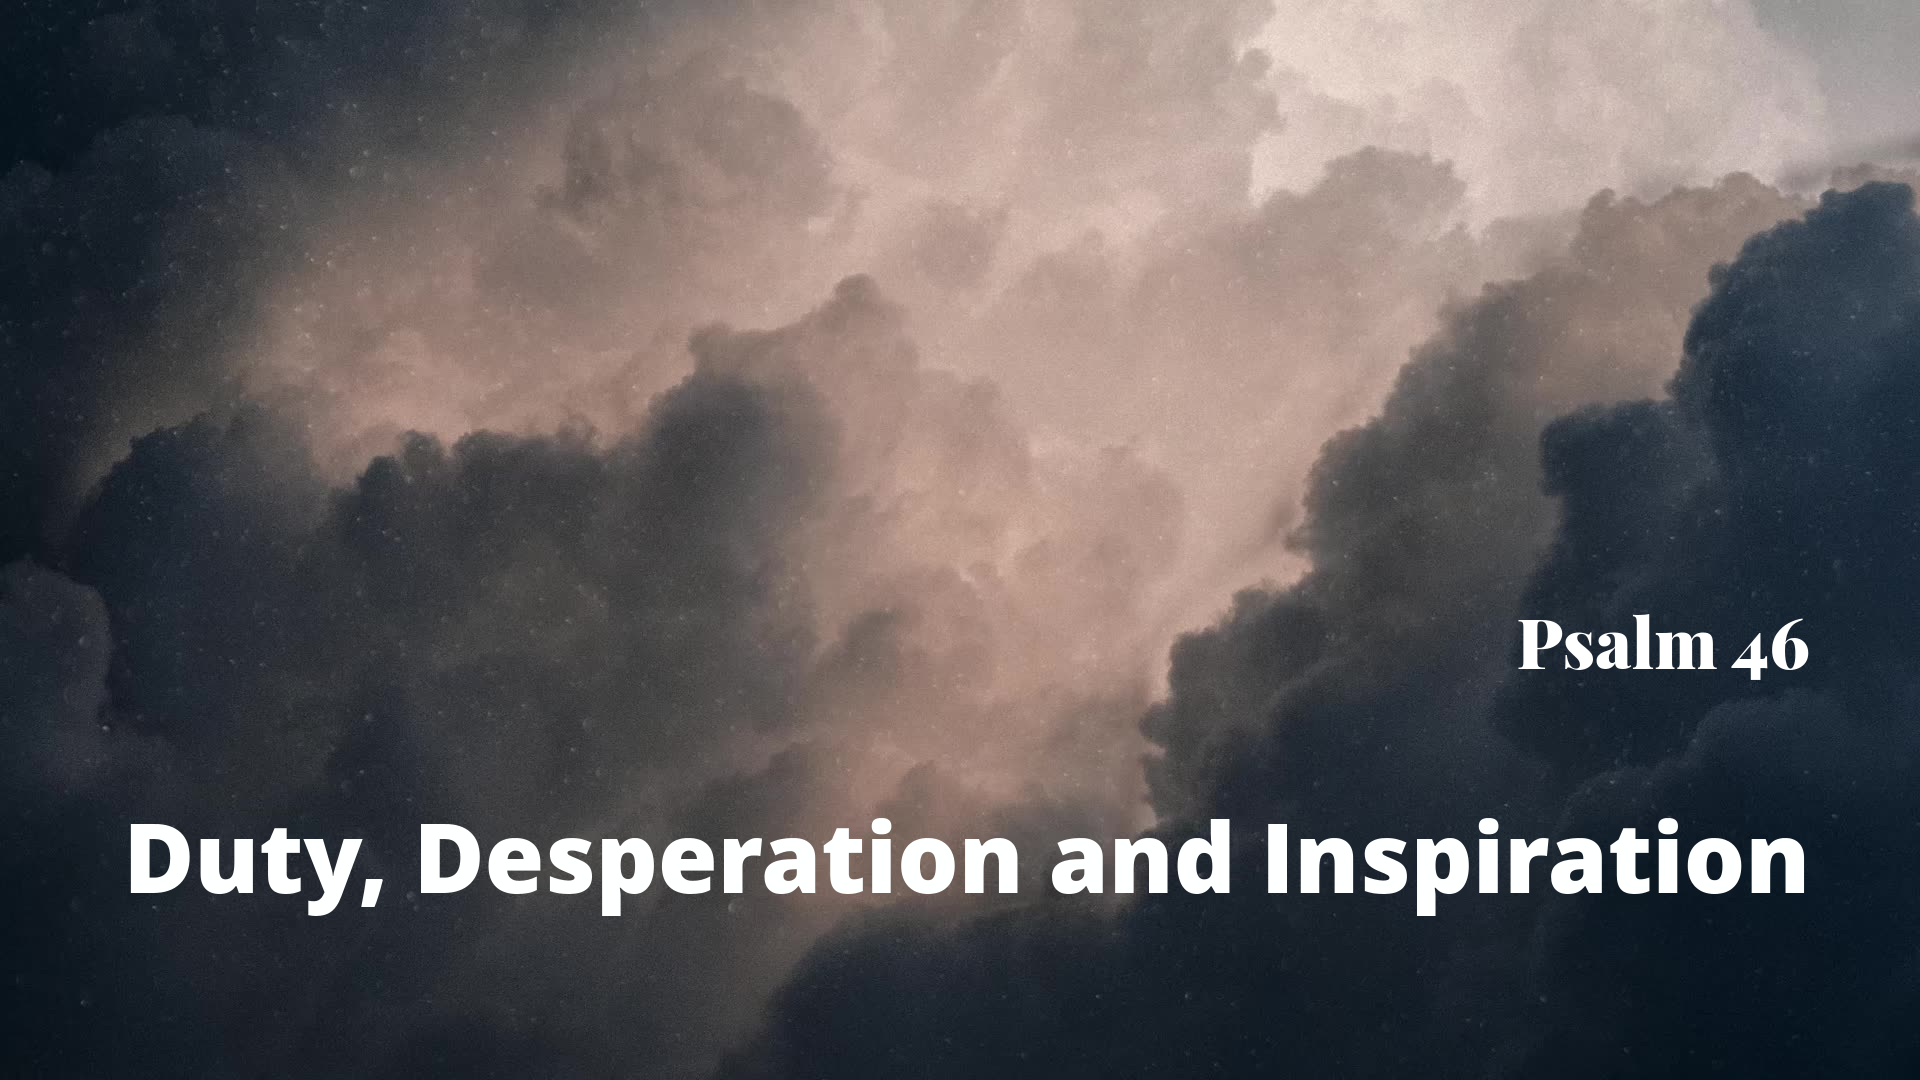 Sep 25, 2022 - Duty, Desperation and Inspiration (Video) - Psalm 46